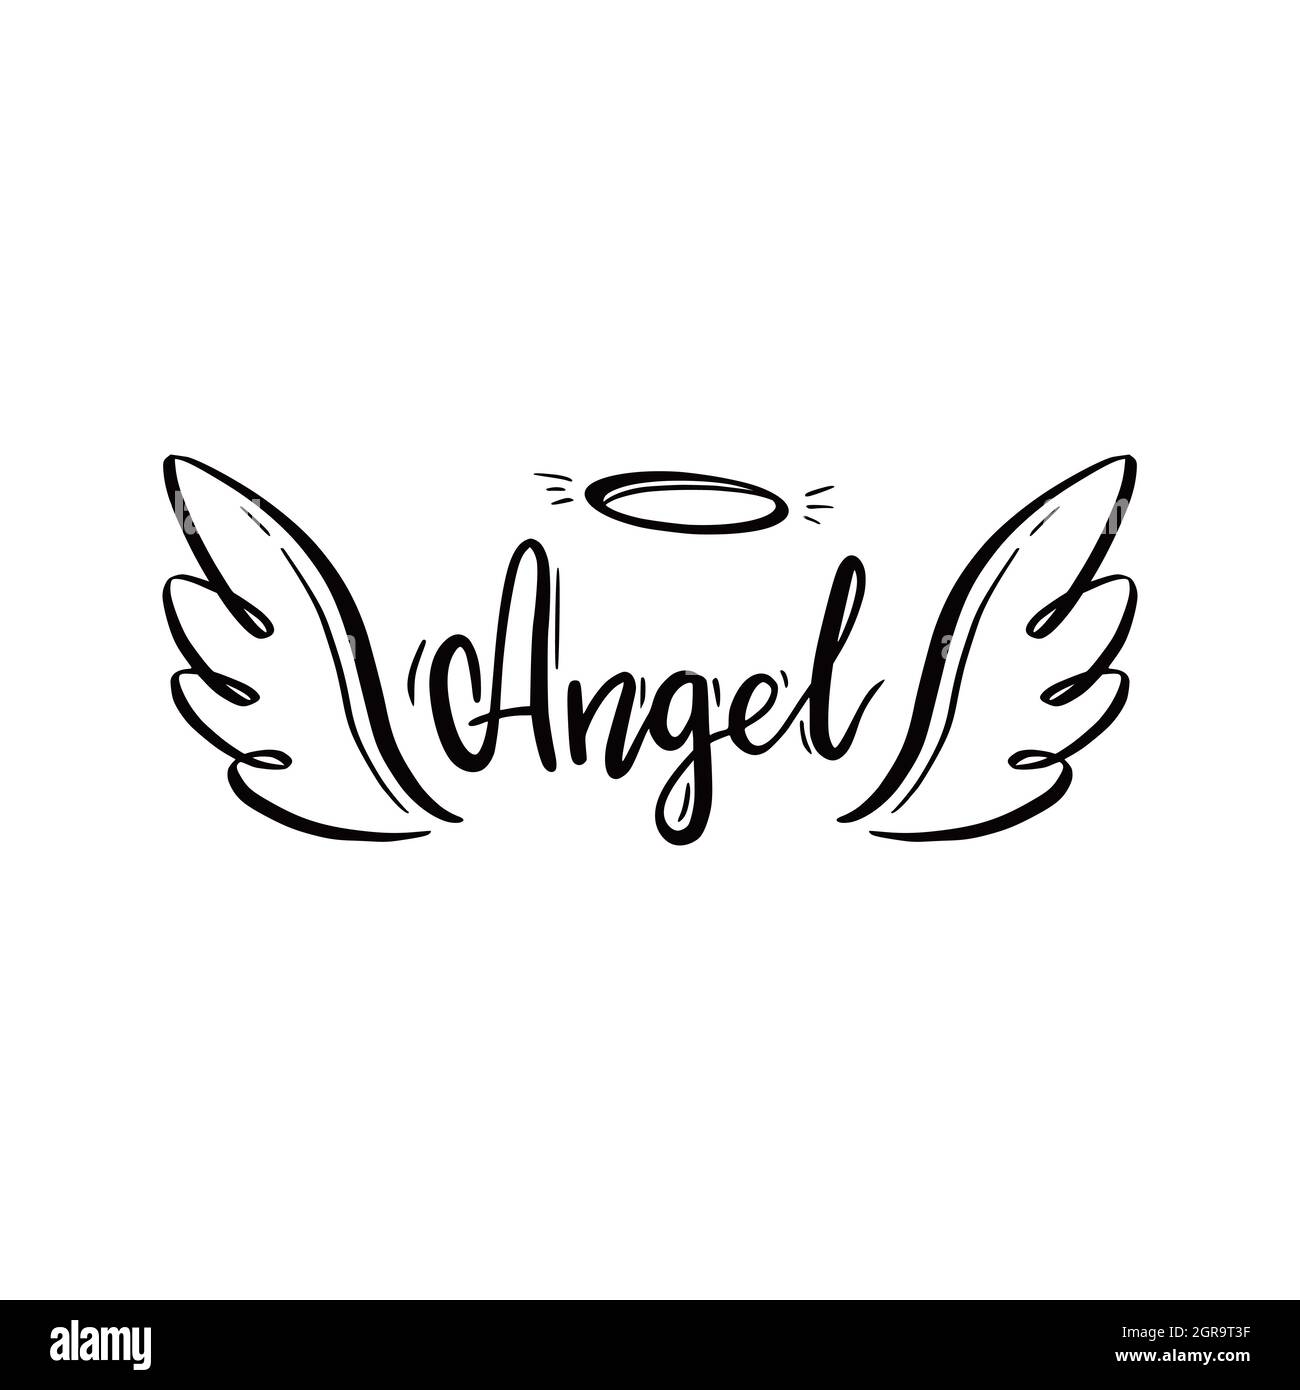 angel-wing-with-halo-and-angel-lettering-text-hand-drawn-line-sketch-style-wing-simple-vector-illustration-stock-vector-image-art-alamy